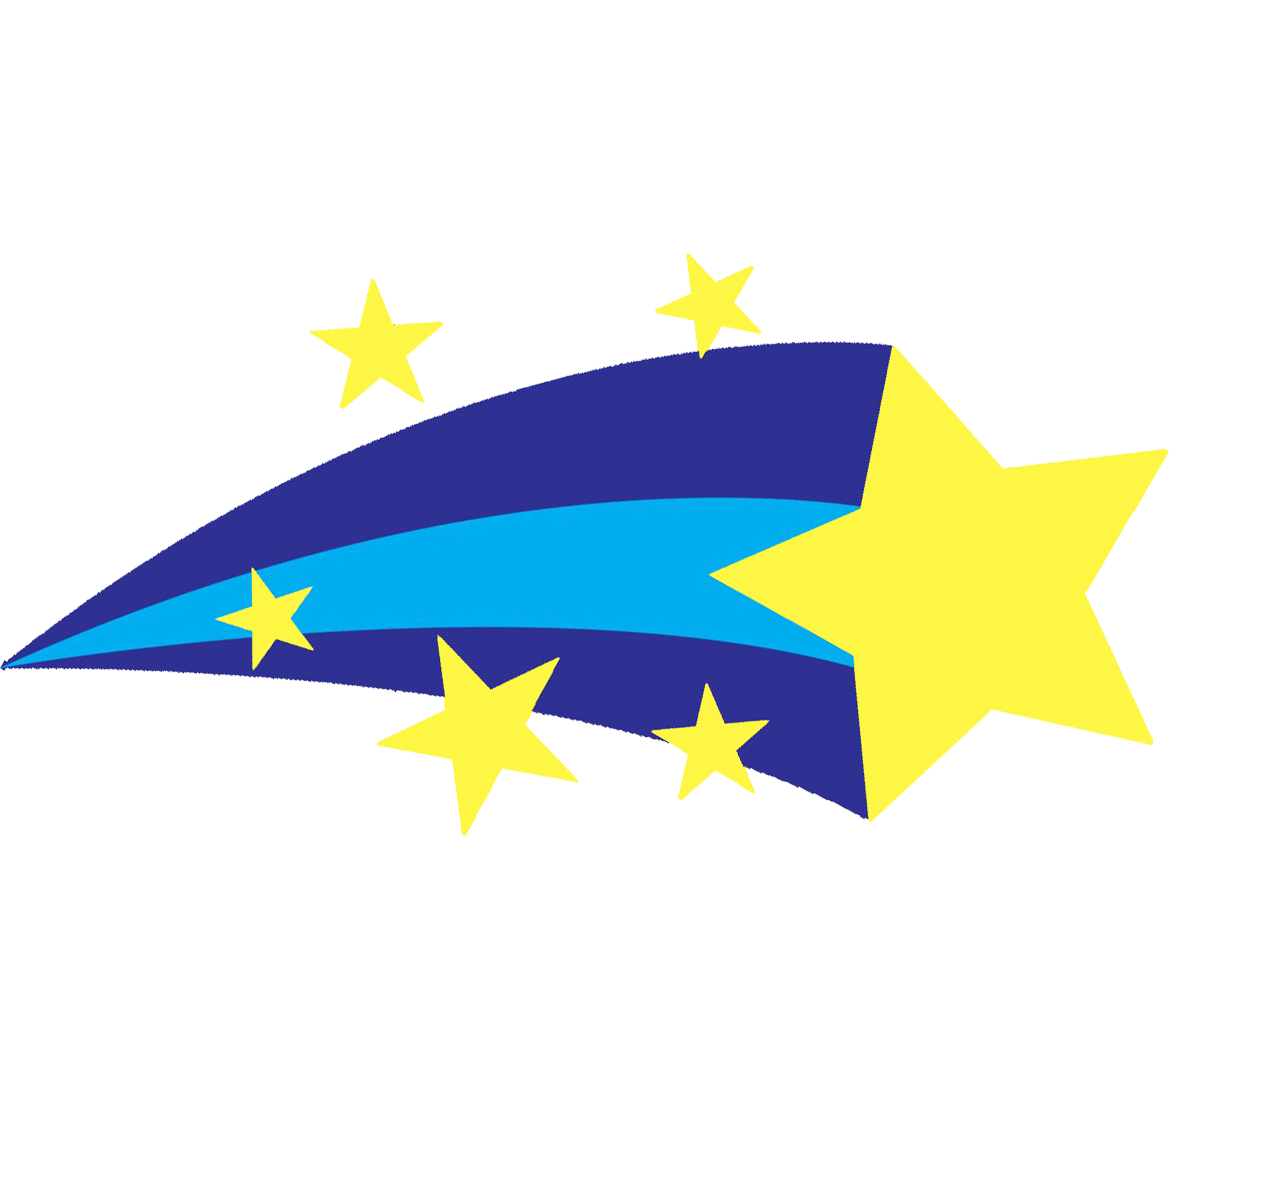 Shooting star clipart png